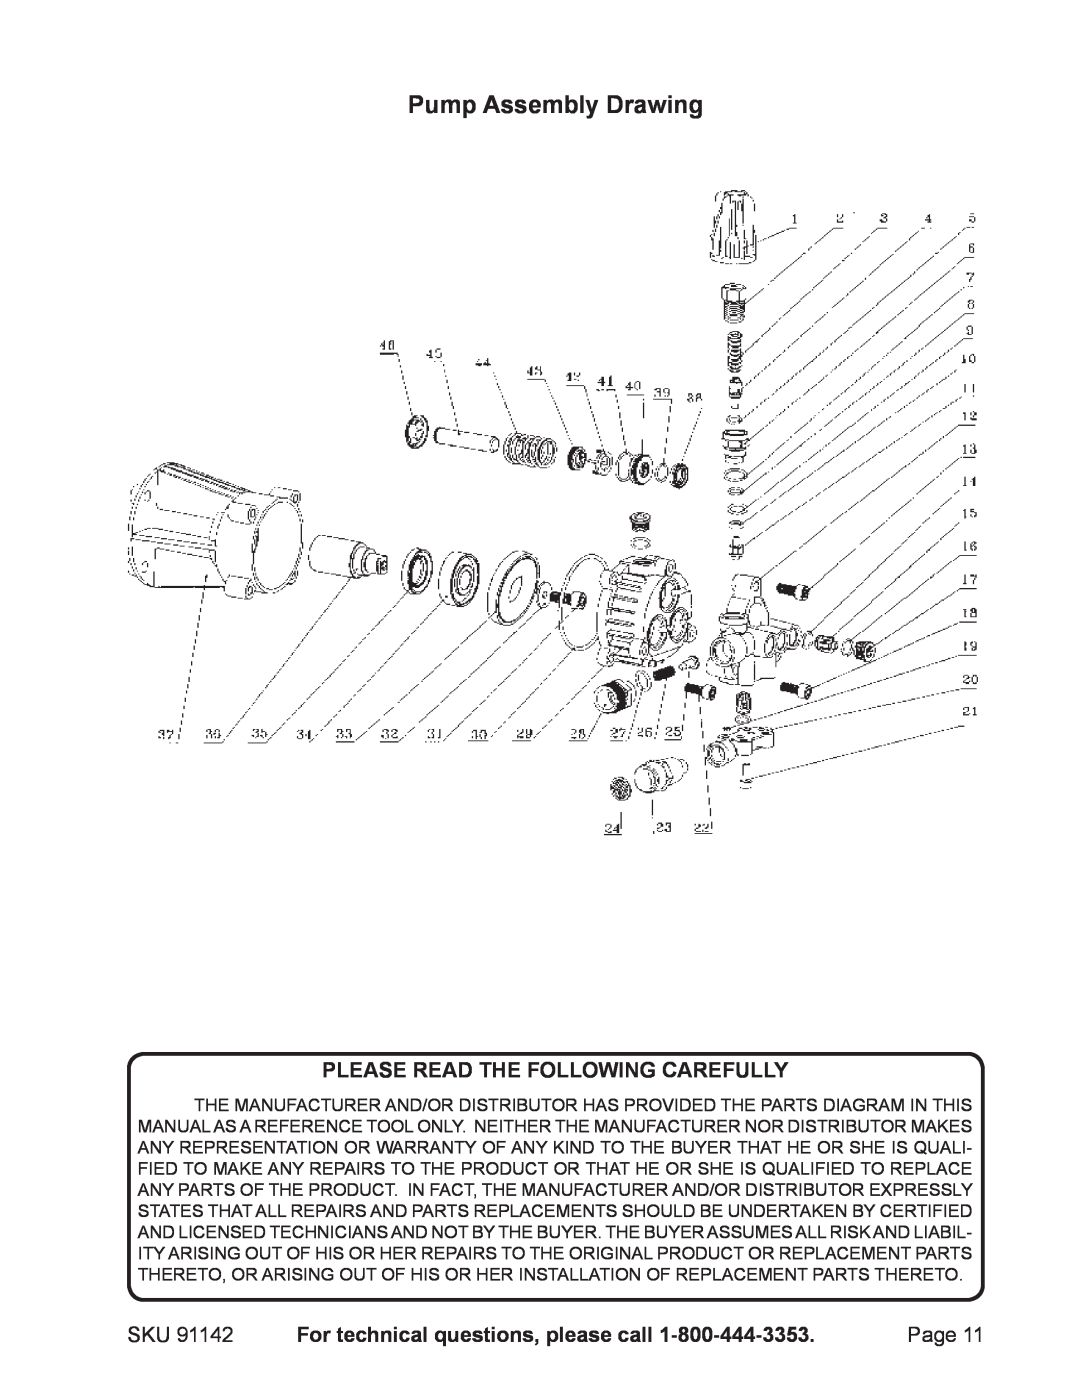 Harbor Freight Tools 91142 manual Pump Assembly Drawing, Please Read The Following Carefully, Page 